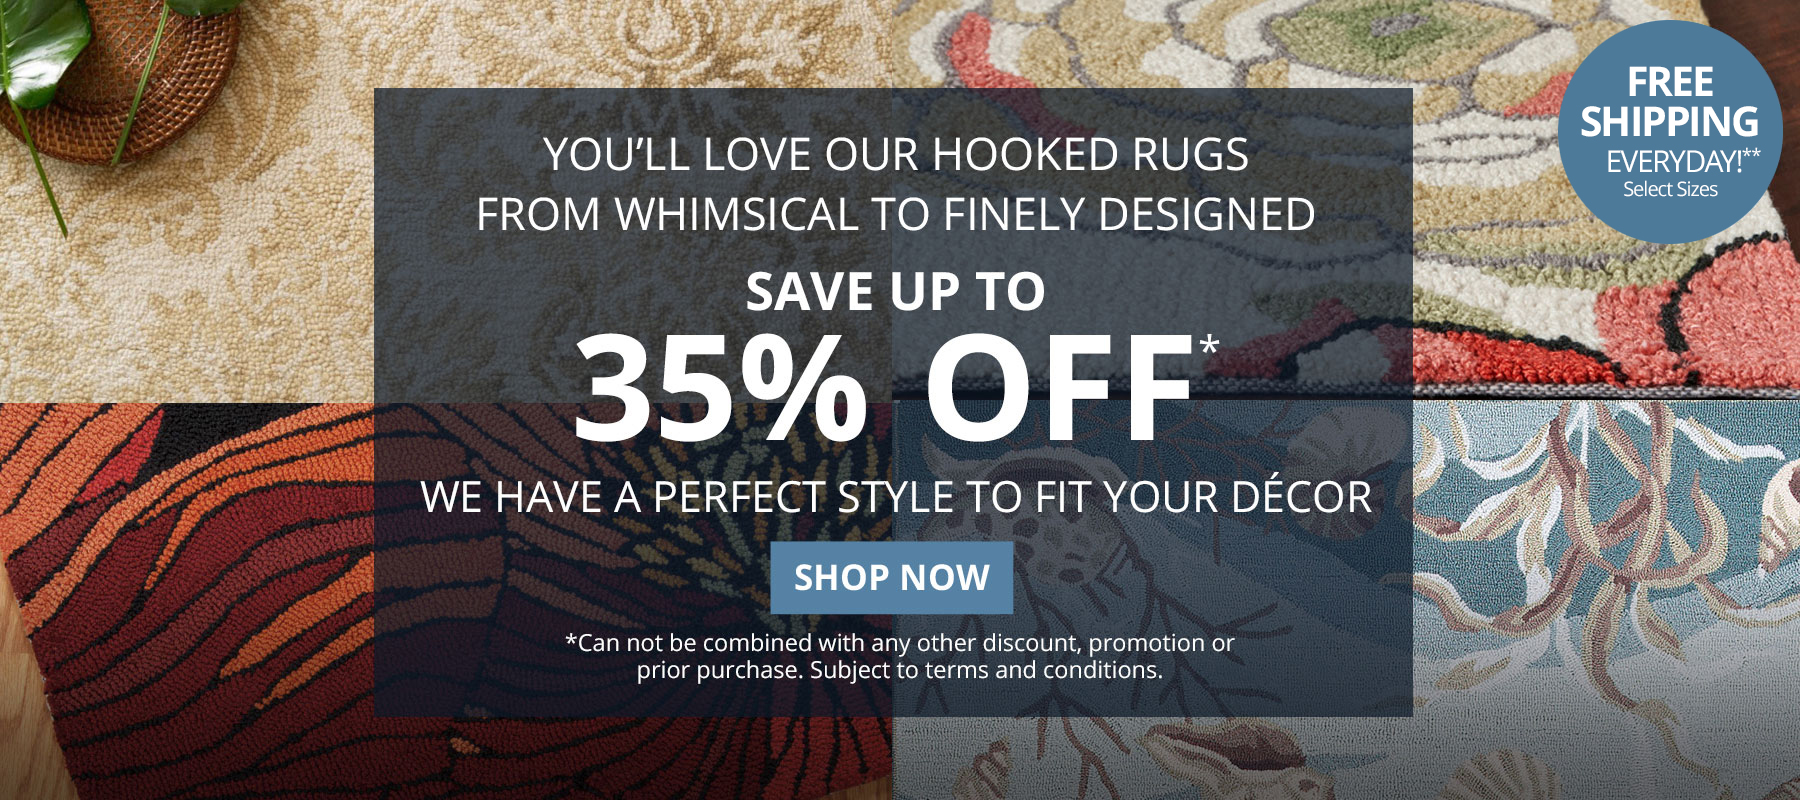 You'll Love Our Hooked Rugs from Whimsical to Finely Designed. Save Up To 35% Off*. We have a perfect style to fit your decor. *Can not be combined with any other discount, promotion or prior purchase. Subject to terms and conditions. Shop Now.